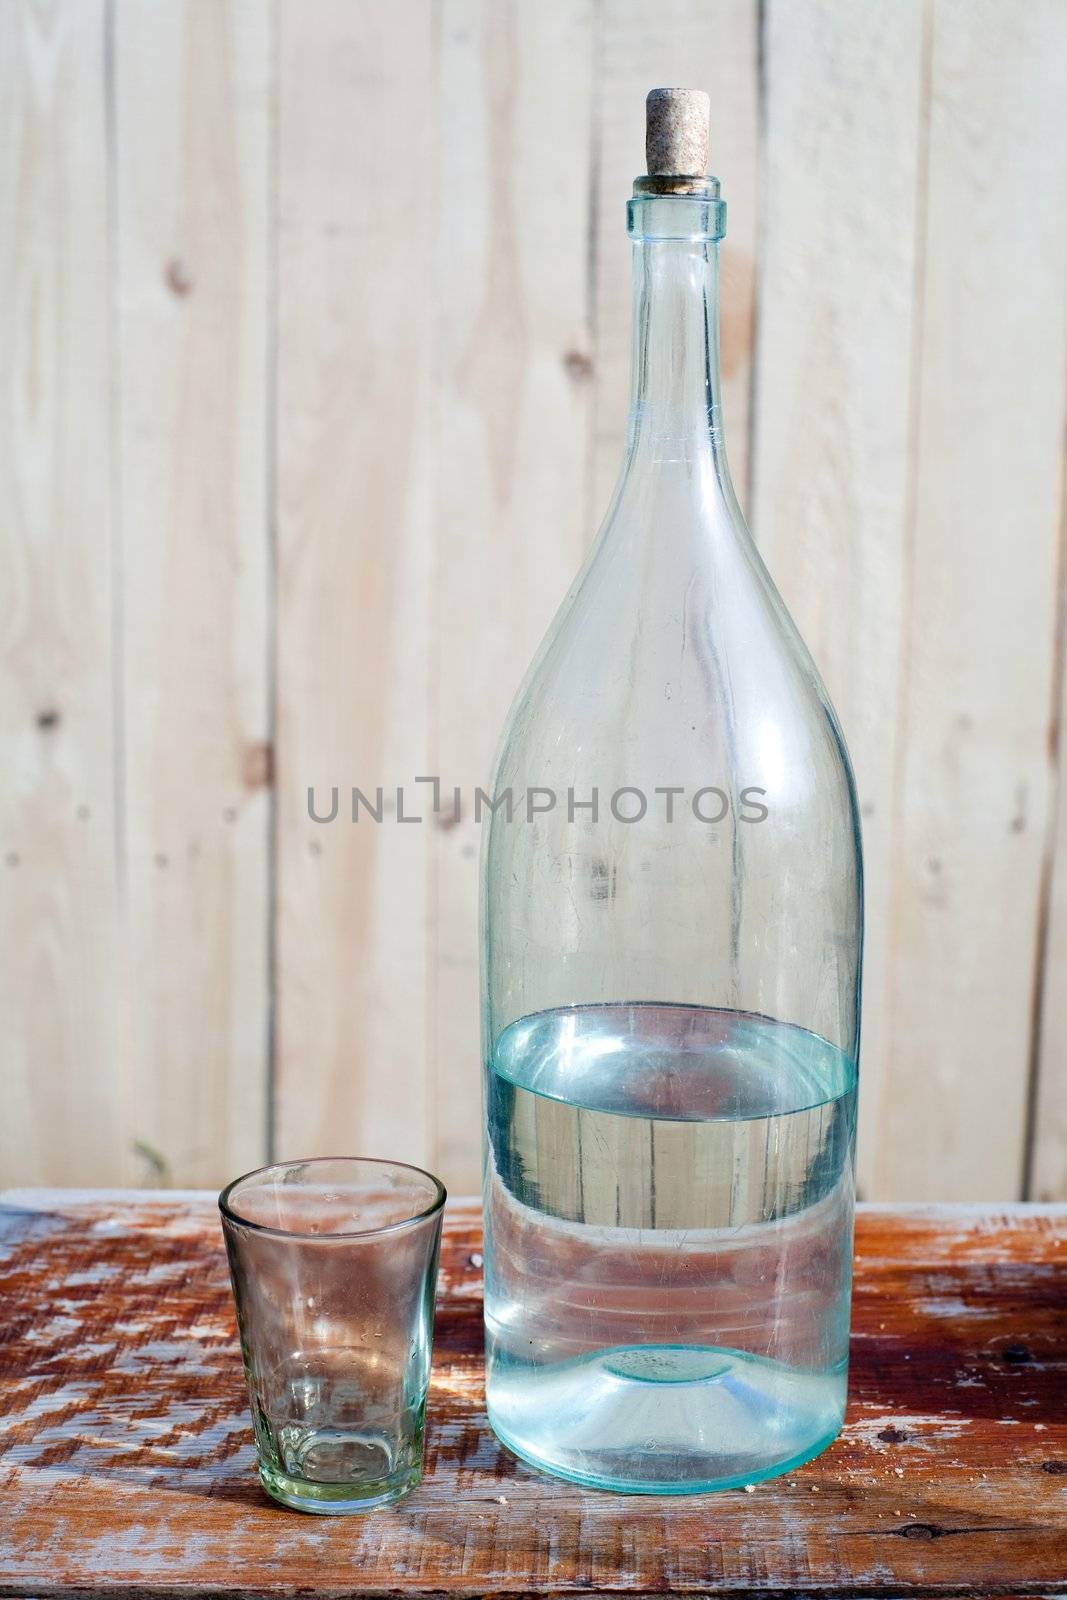 An image of a half-full bottle and a glass